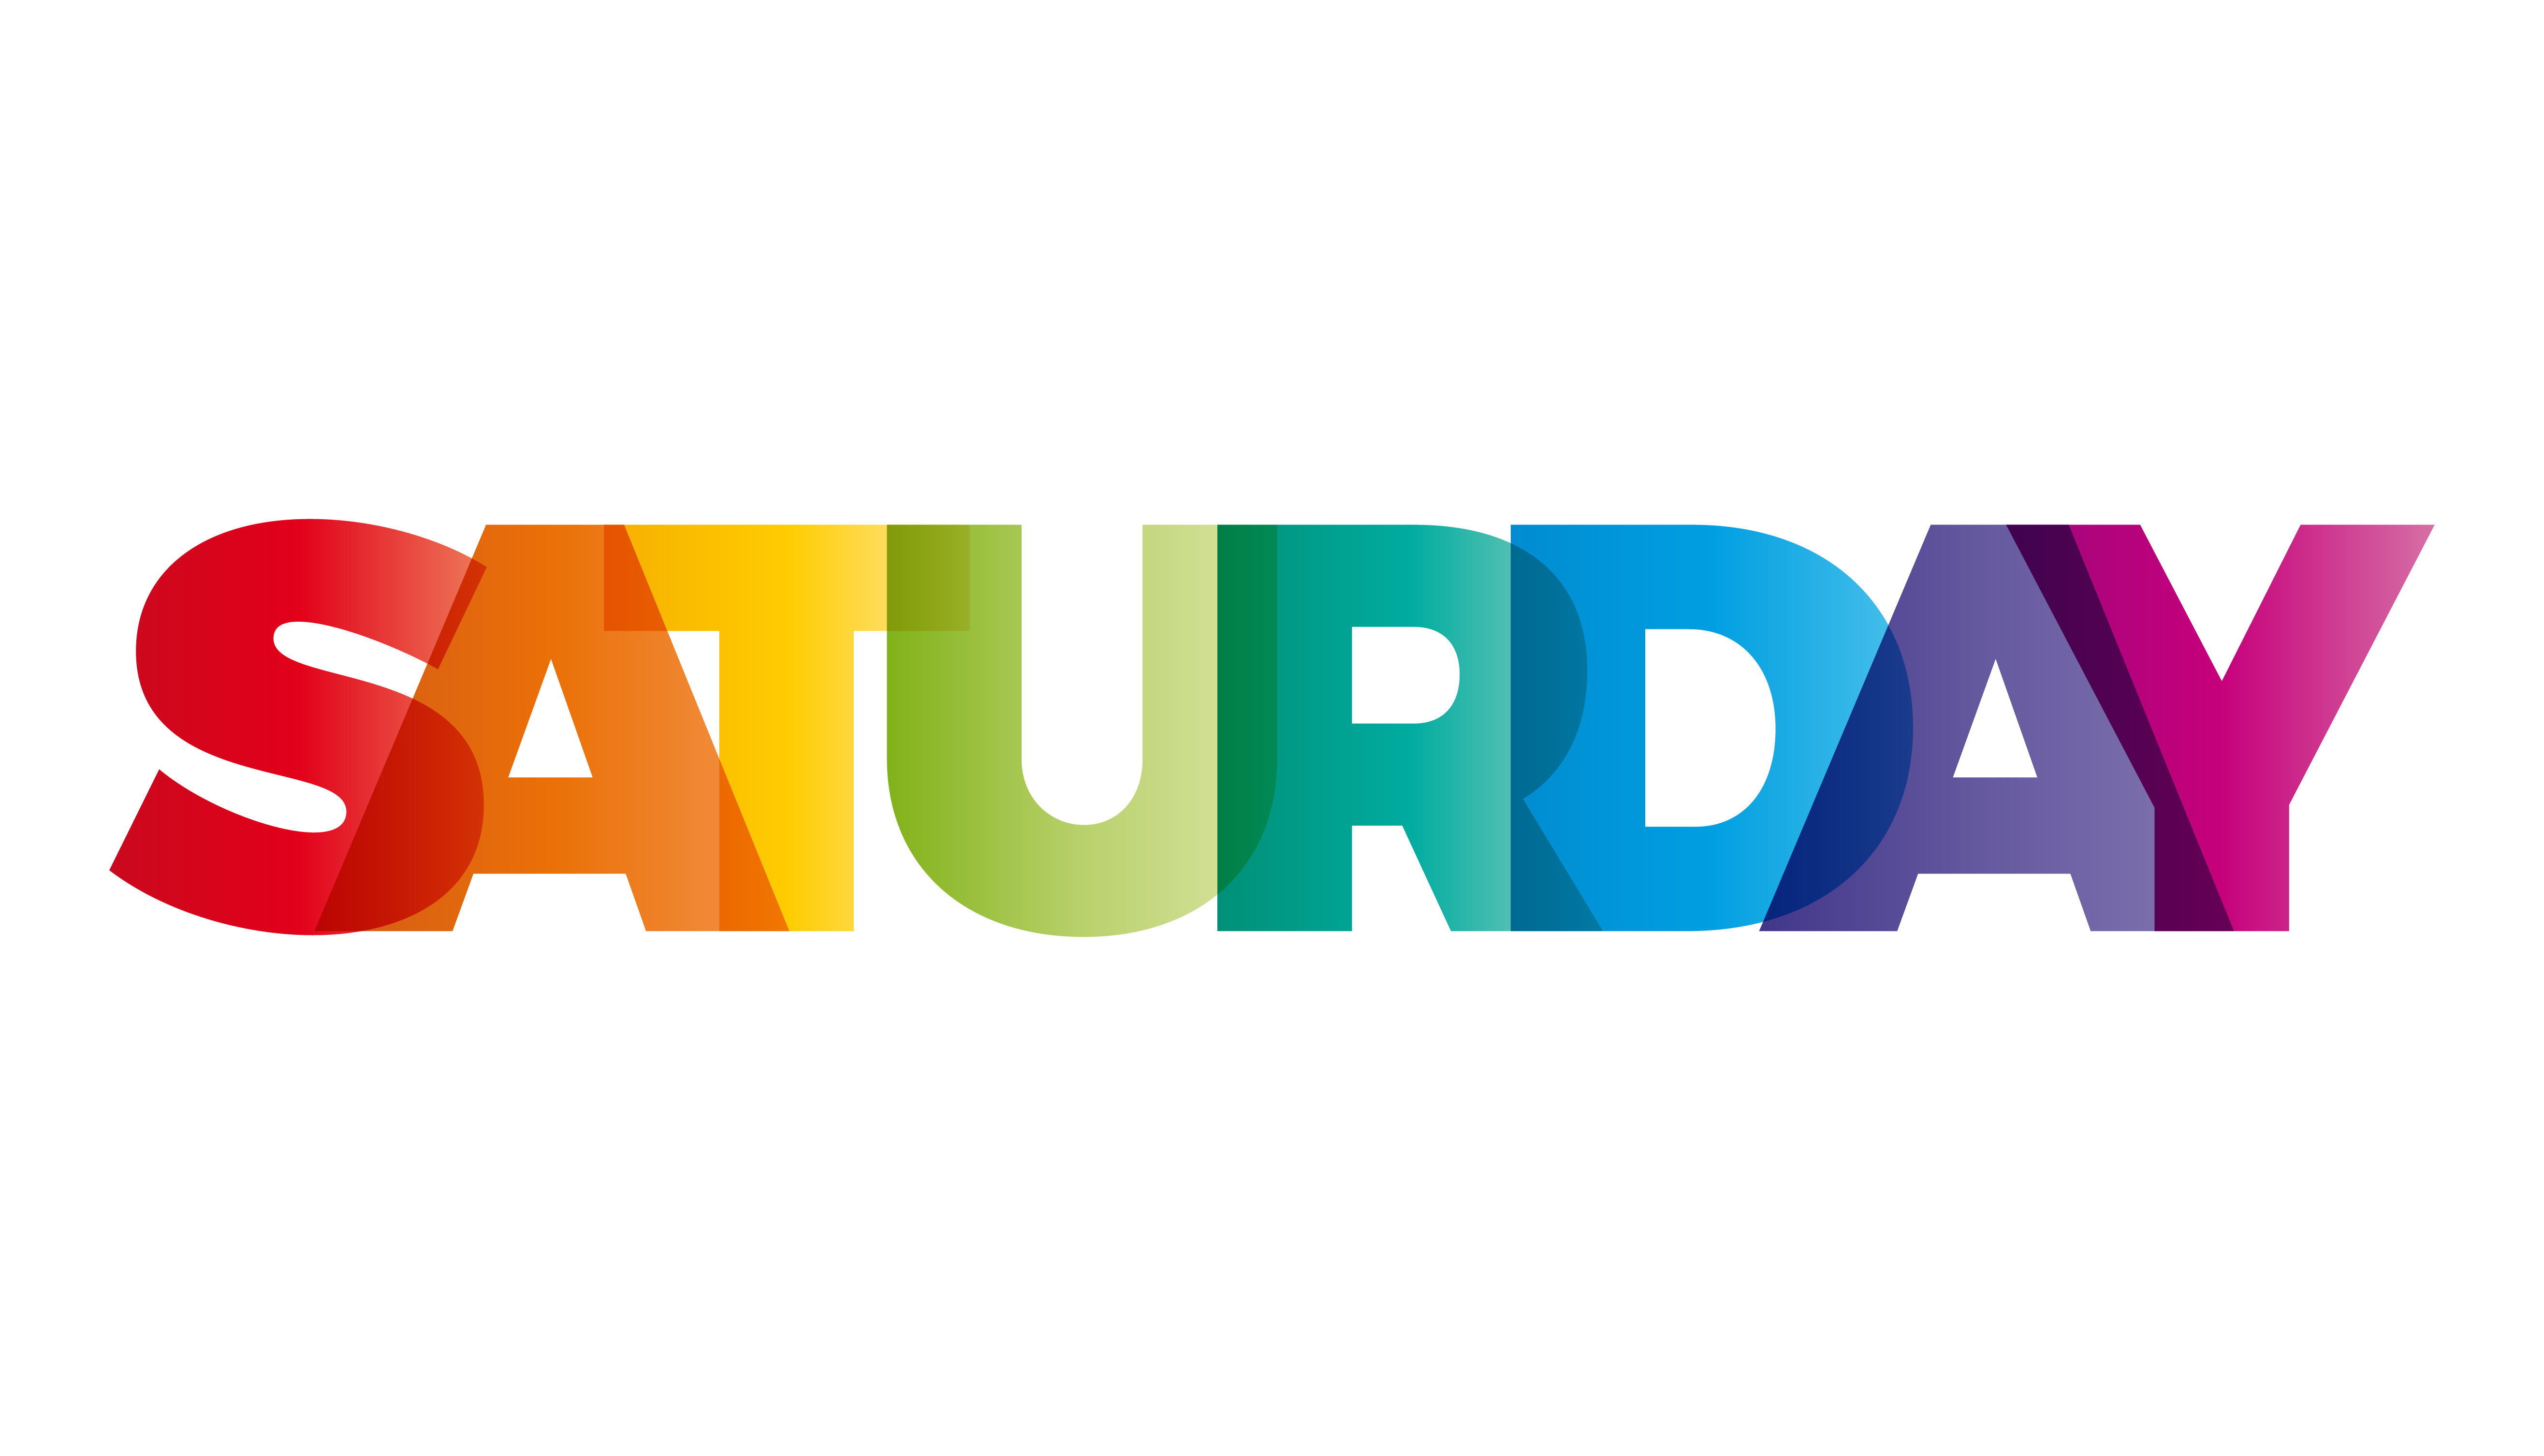 The Word Saturday